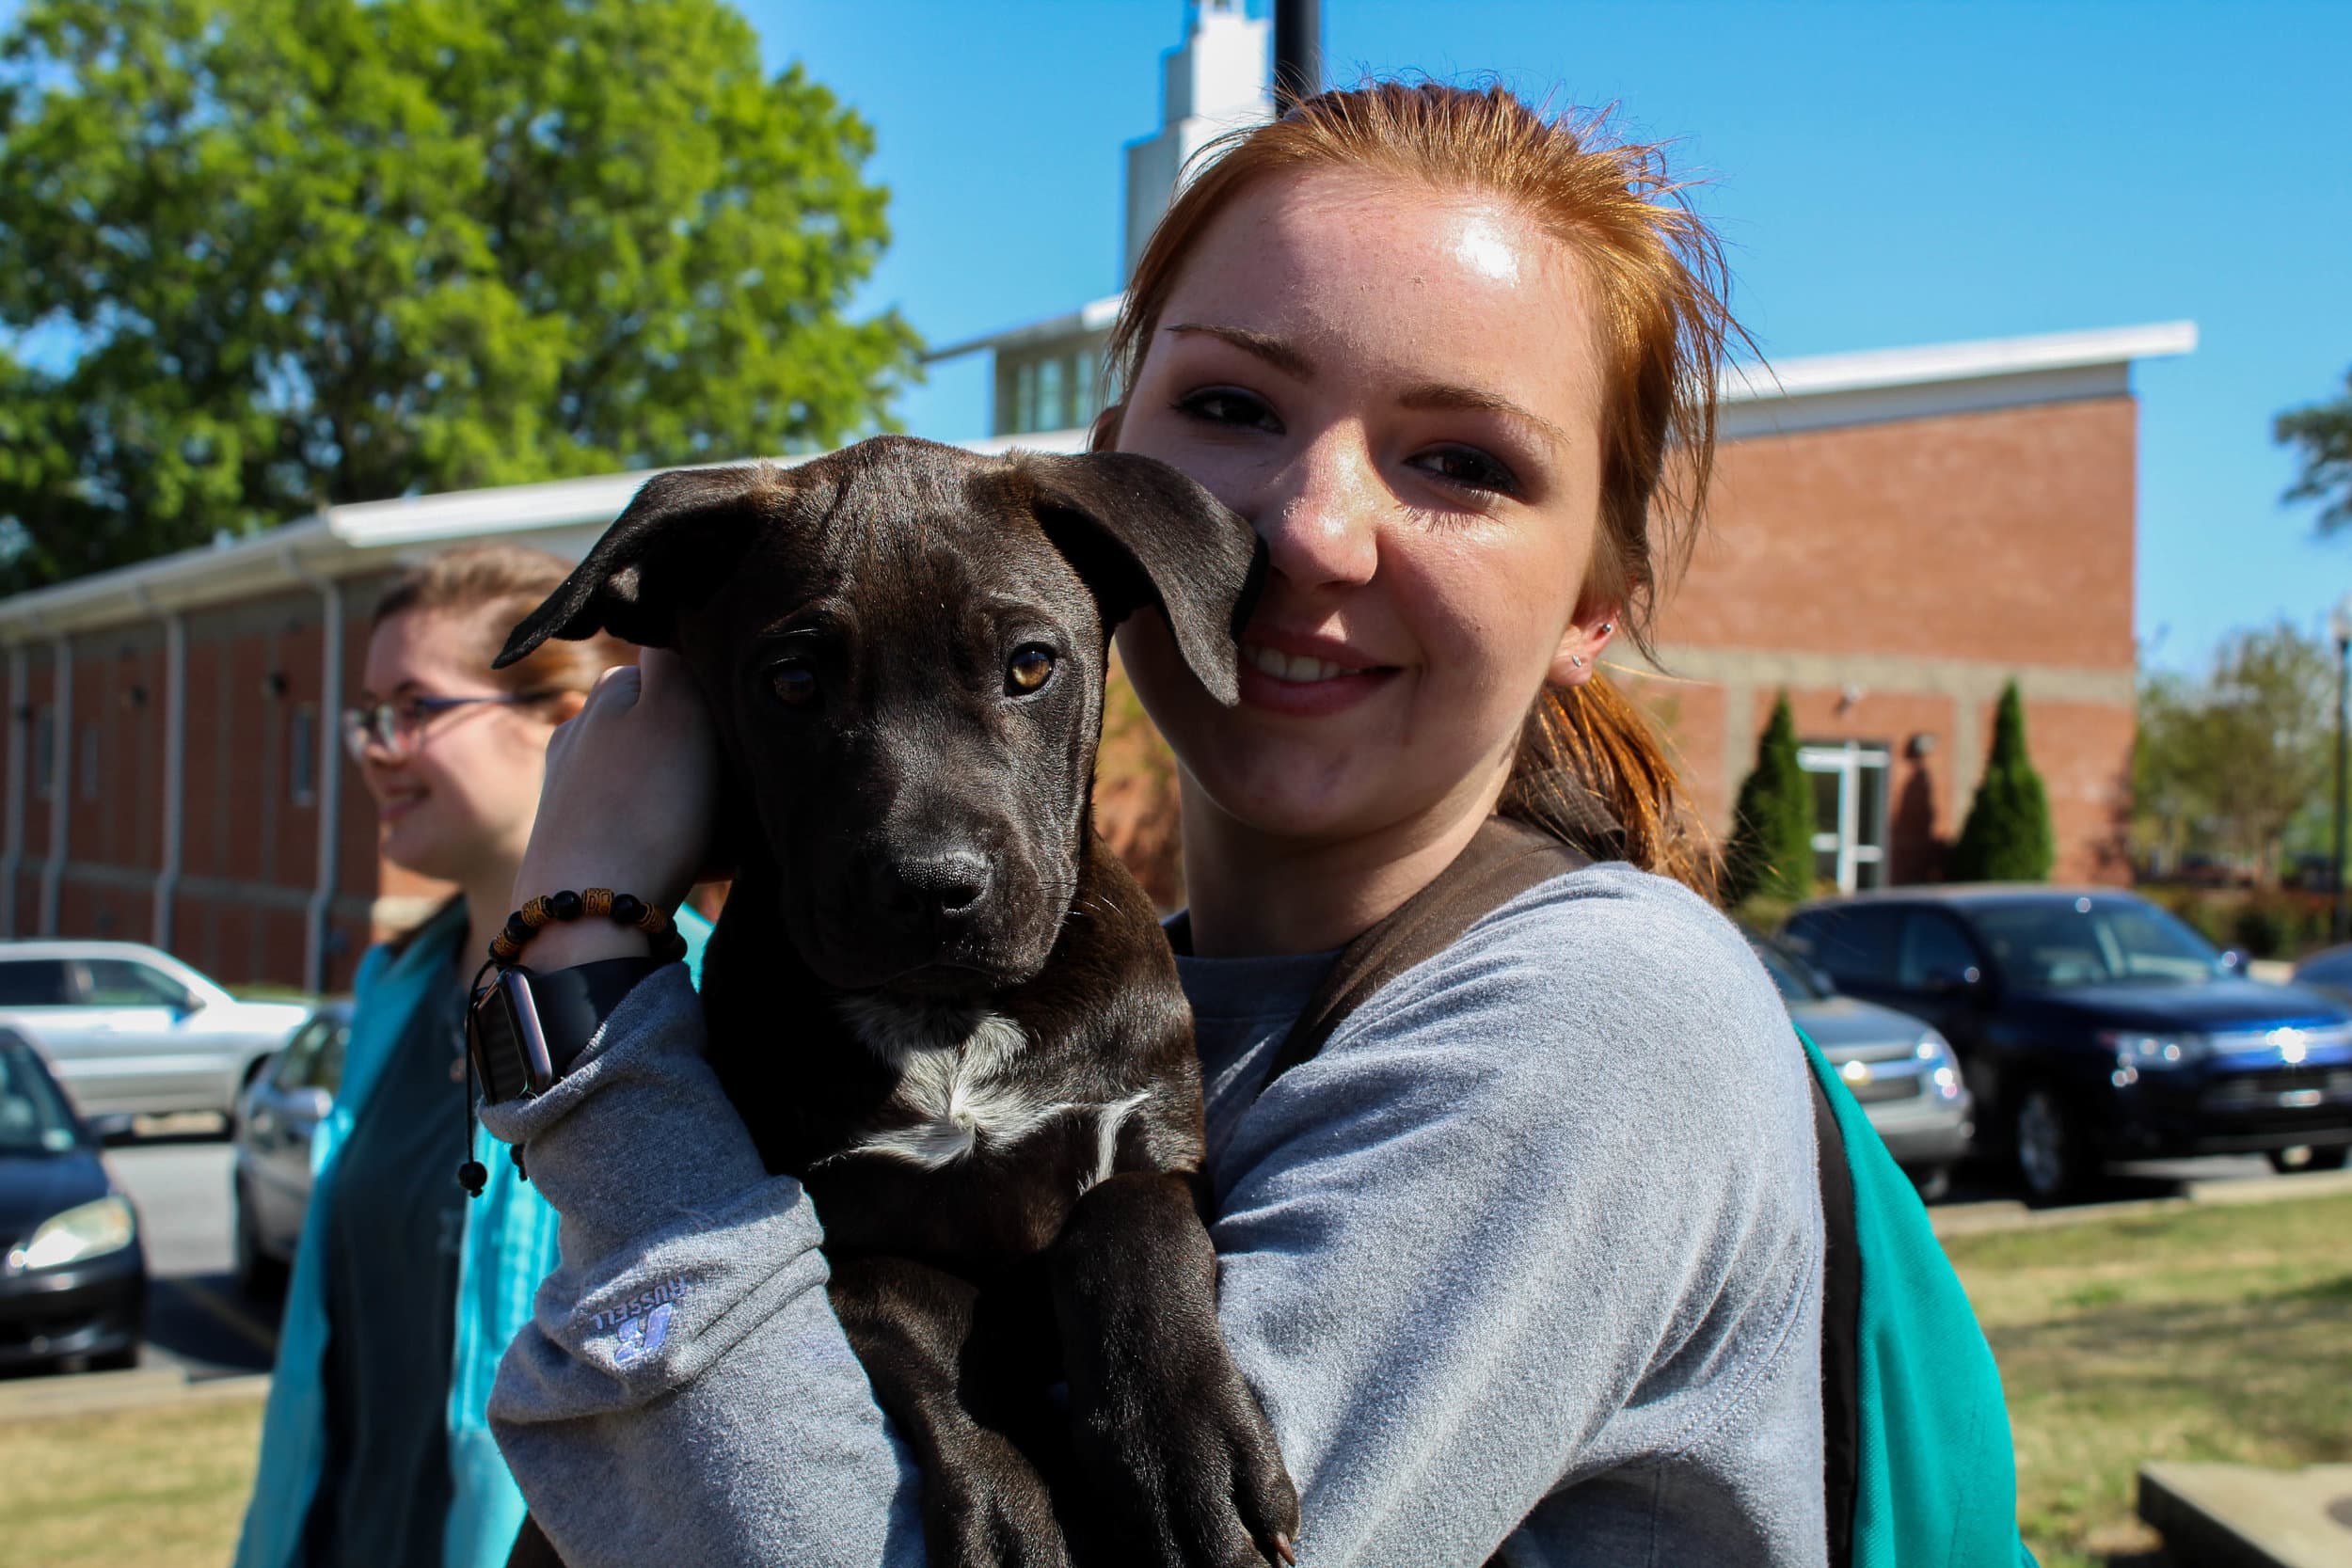 Annabrooke Heatherly, a member of the Animal Science Club, shows her love for animals as she holds one of the puppies.